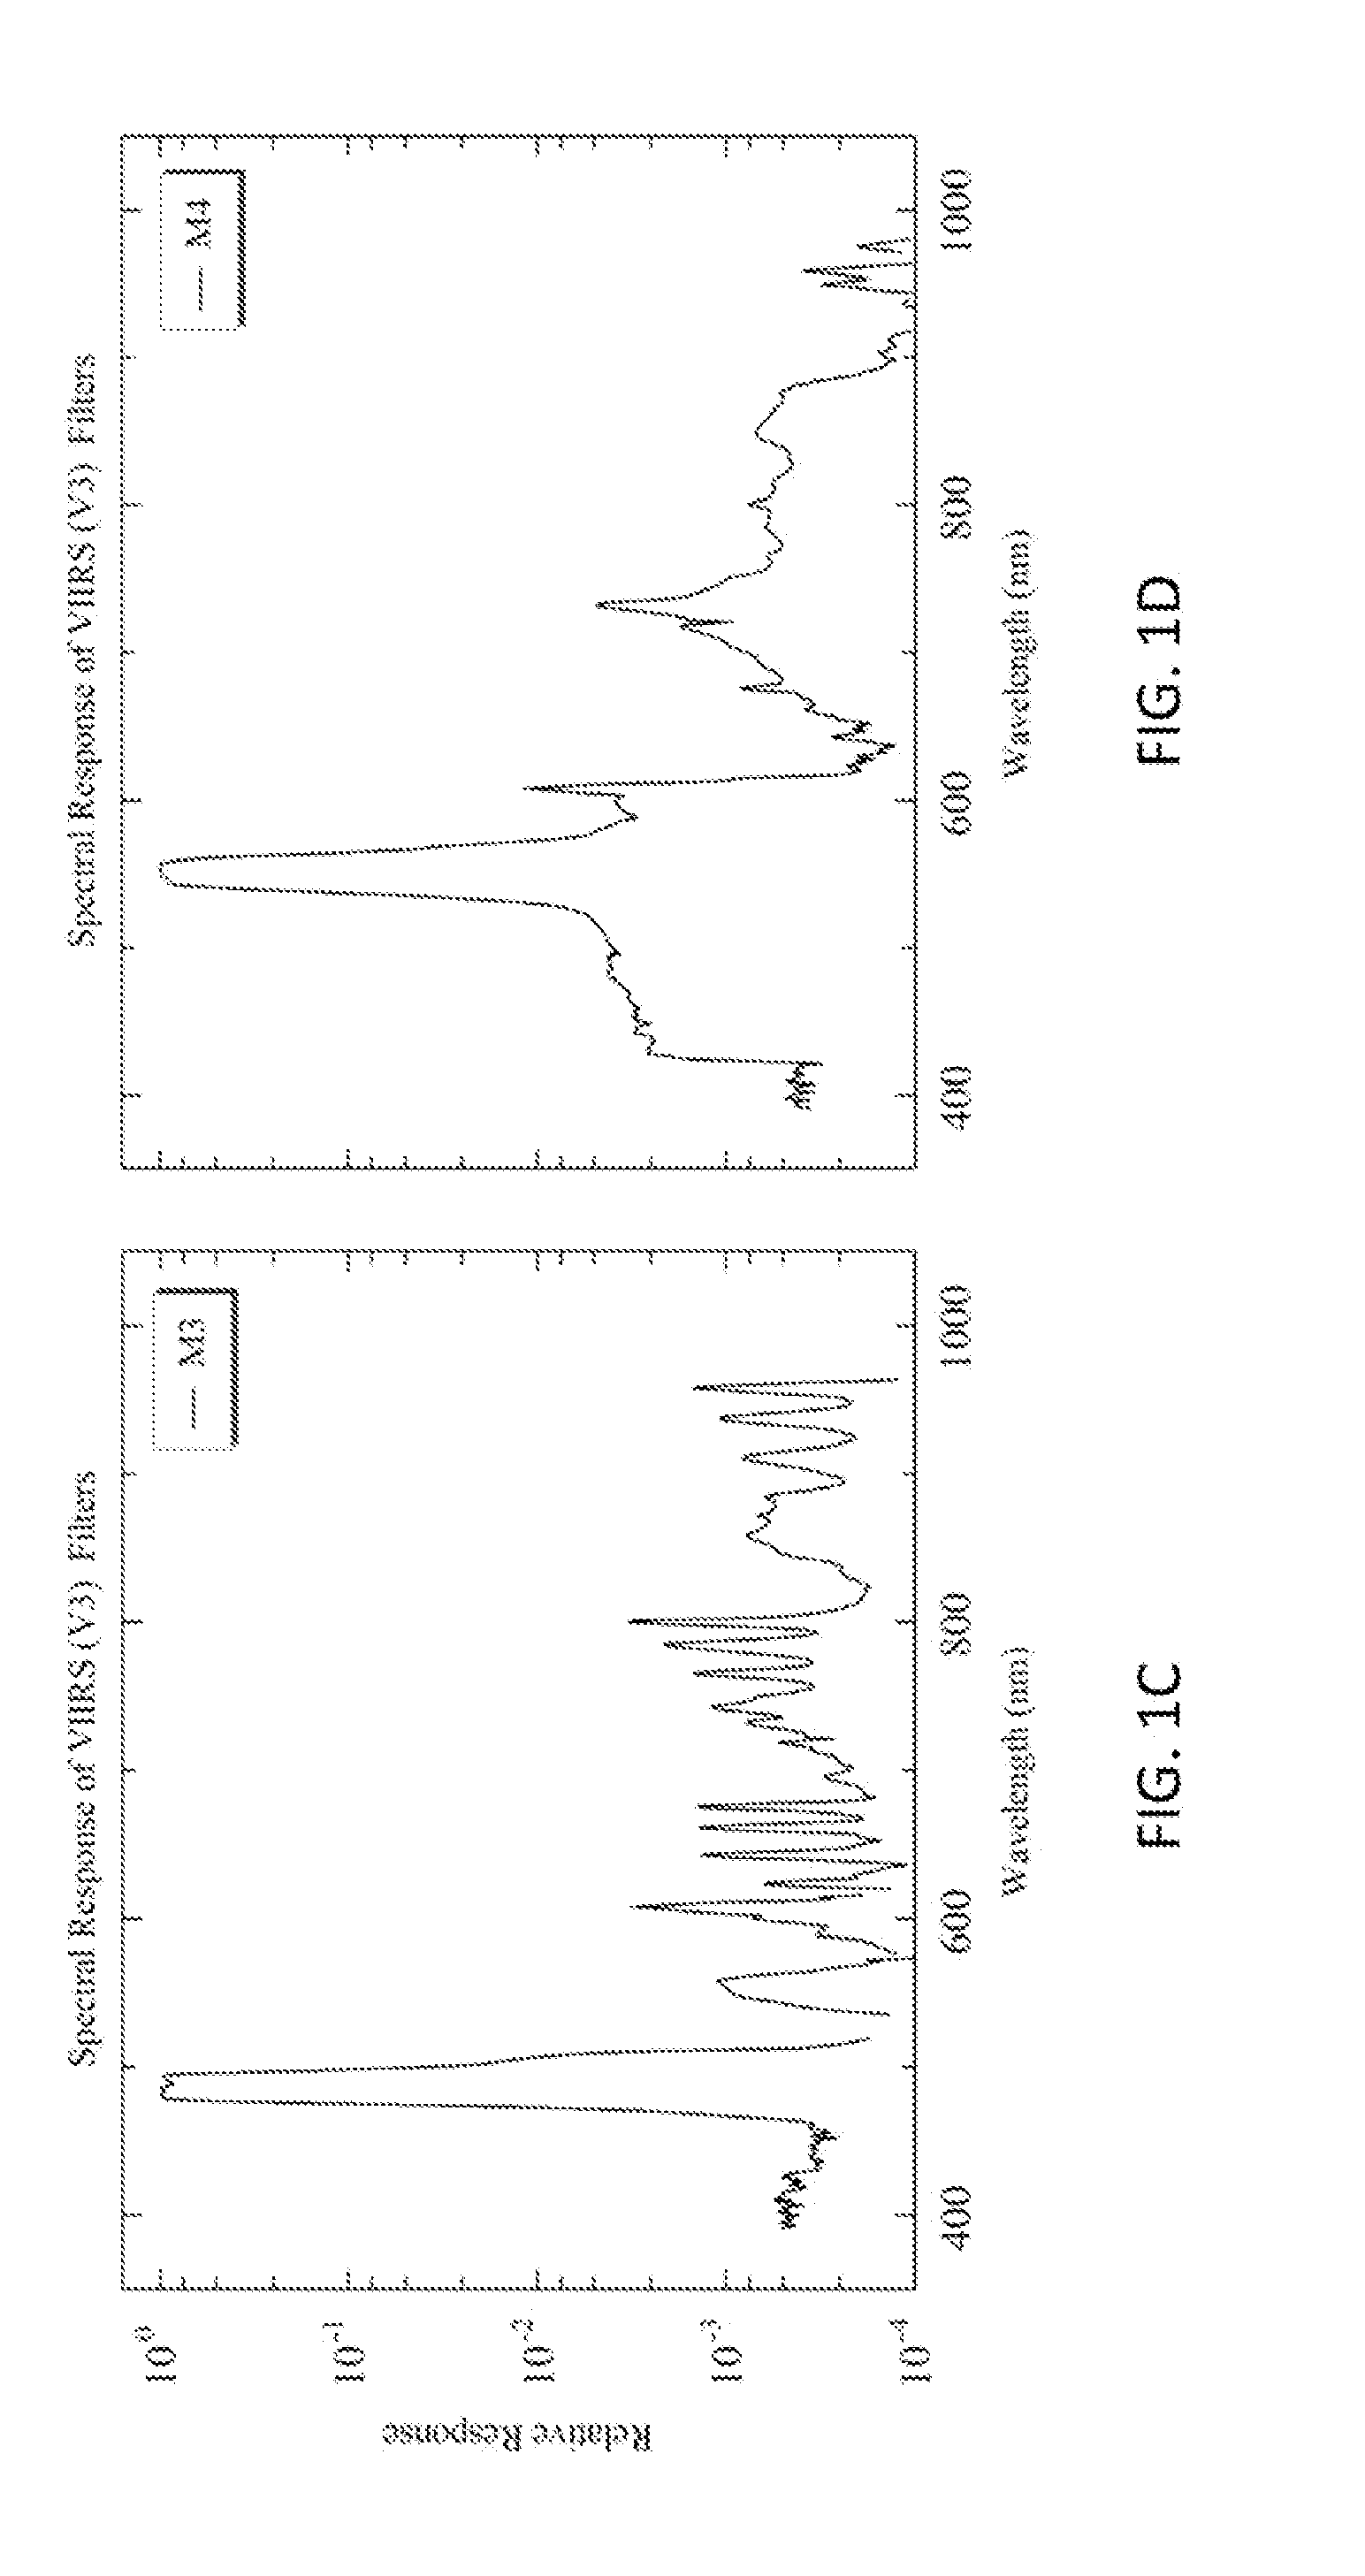 Method of multispectral decomposition for the removal of out-of-band effects